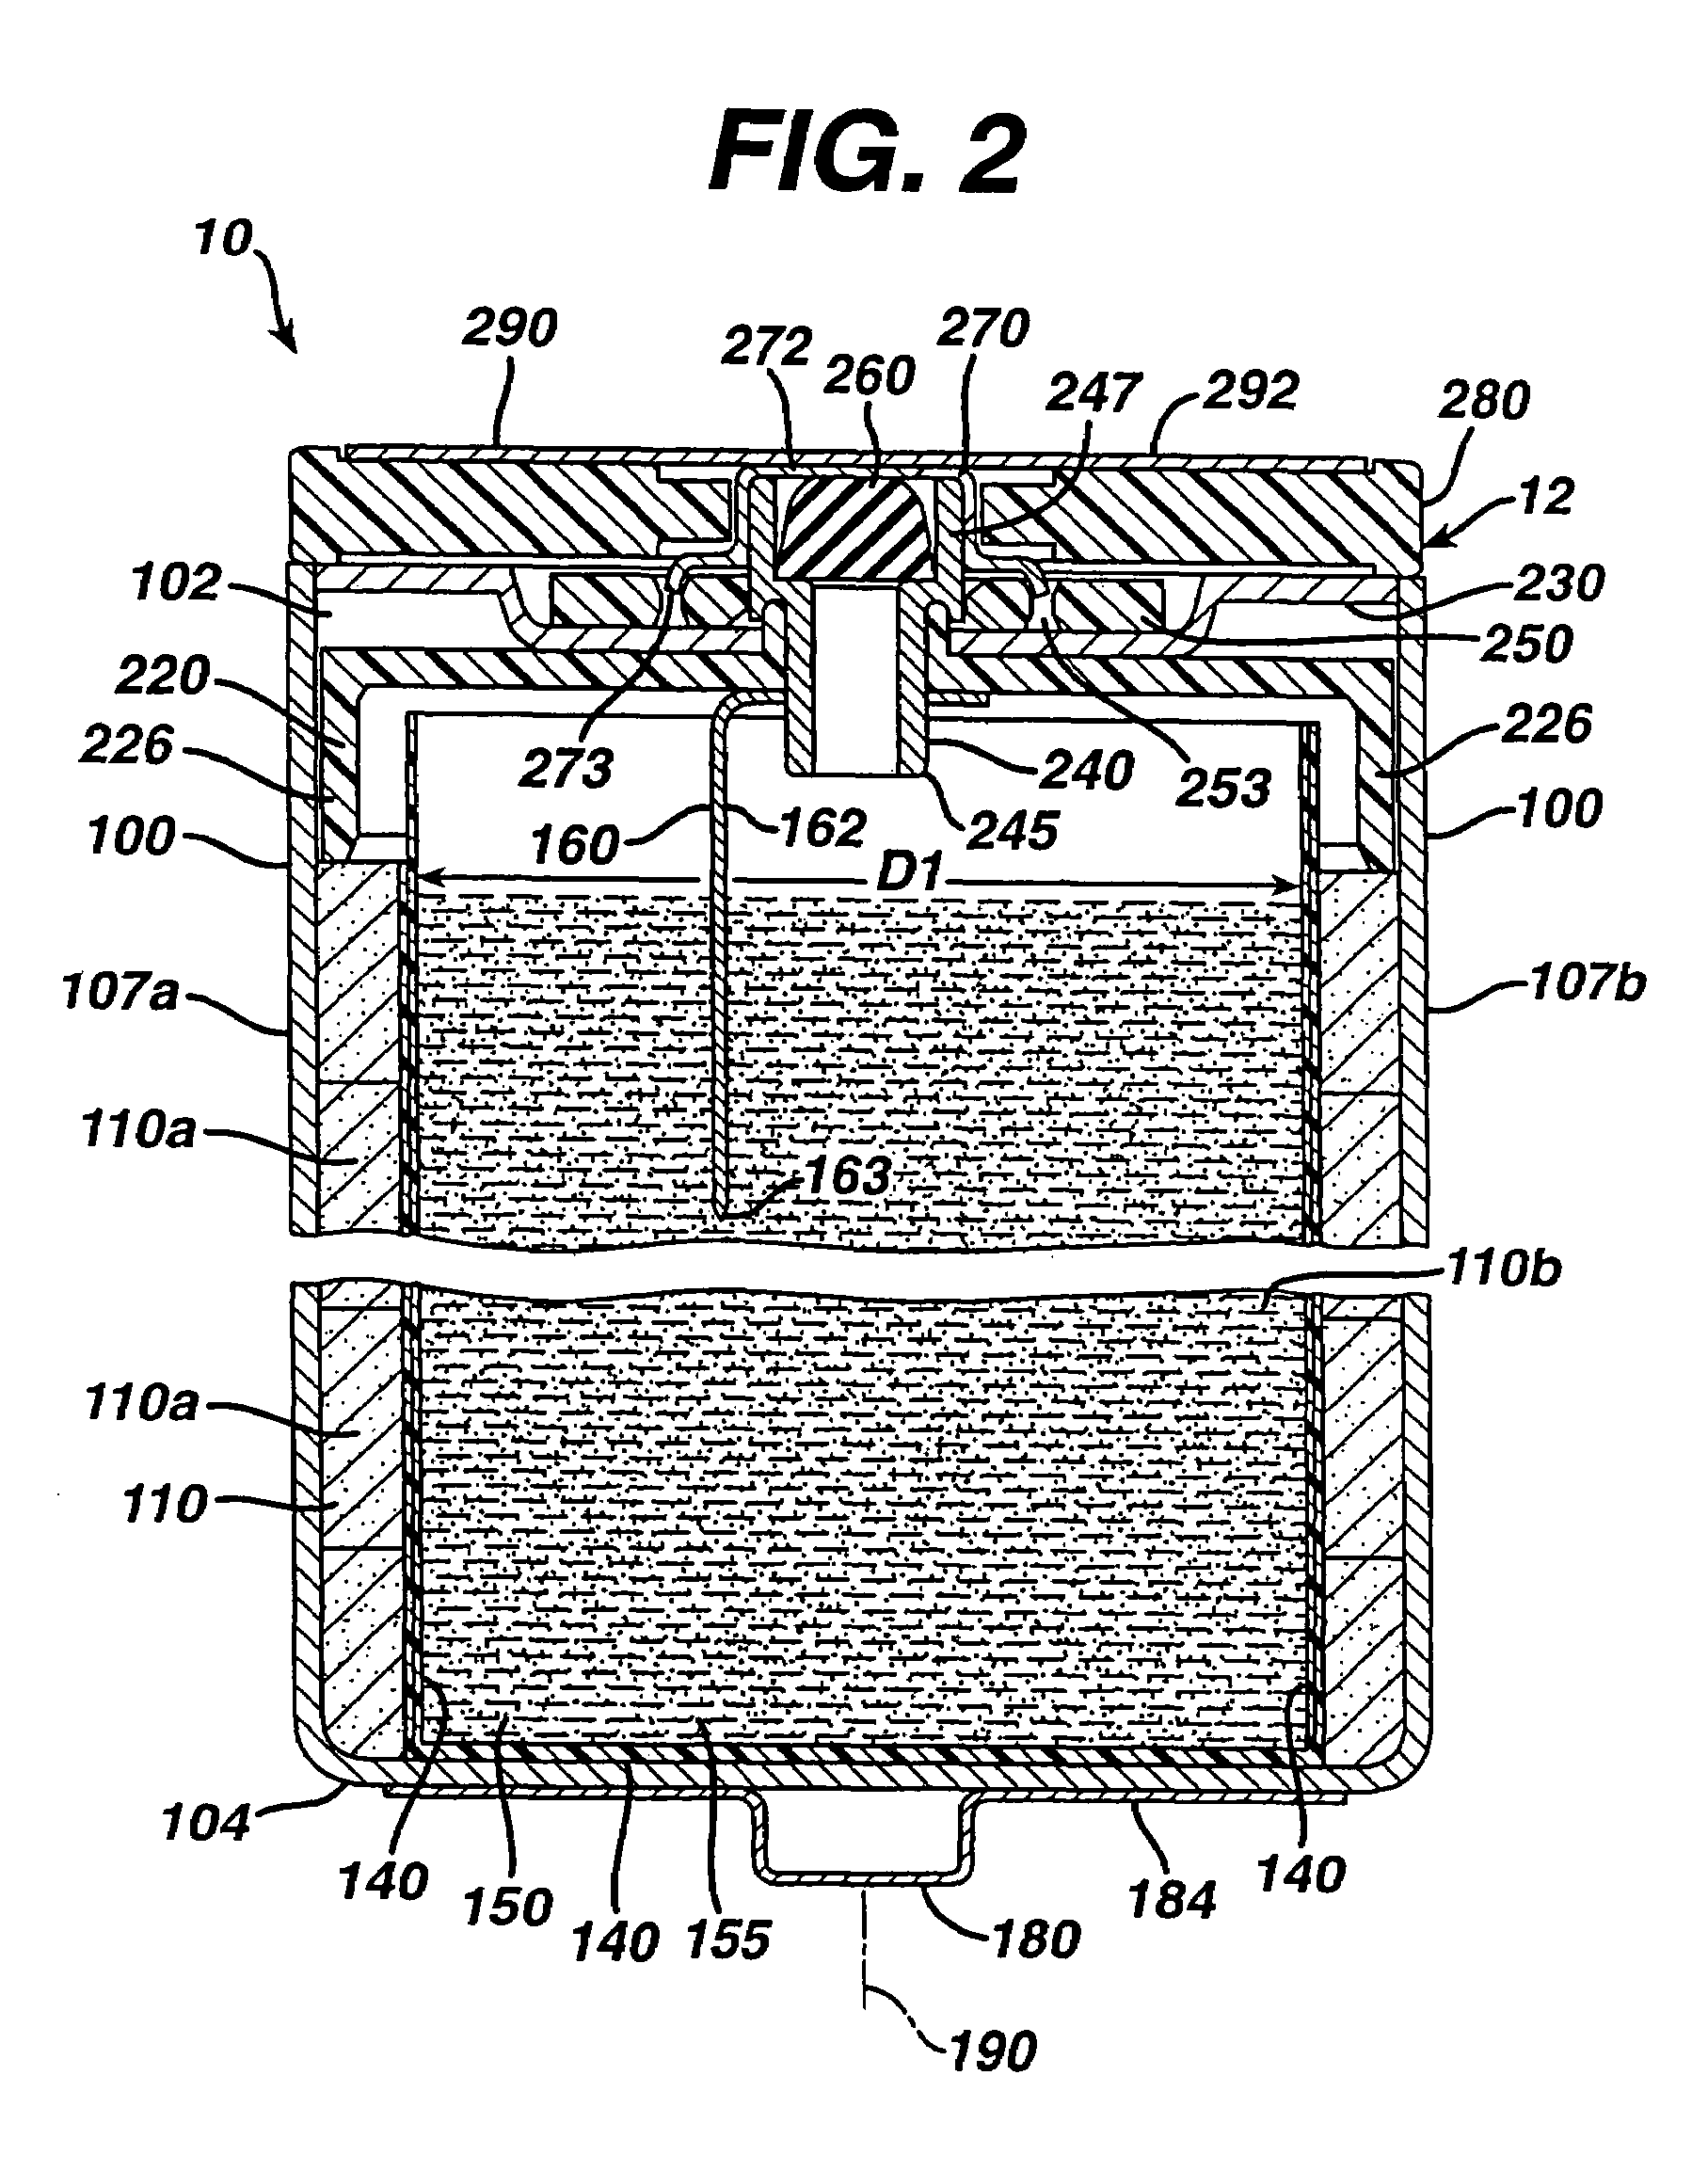 Alkaline cell with flat housing and nickel oxyhydroxide cathode